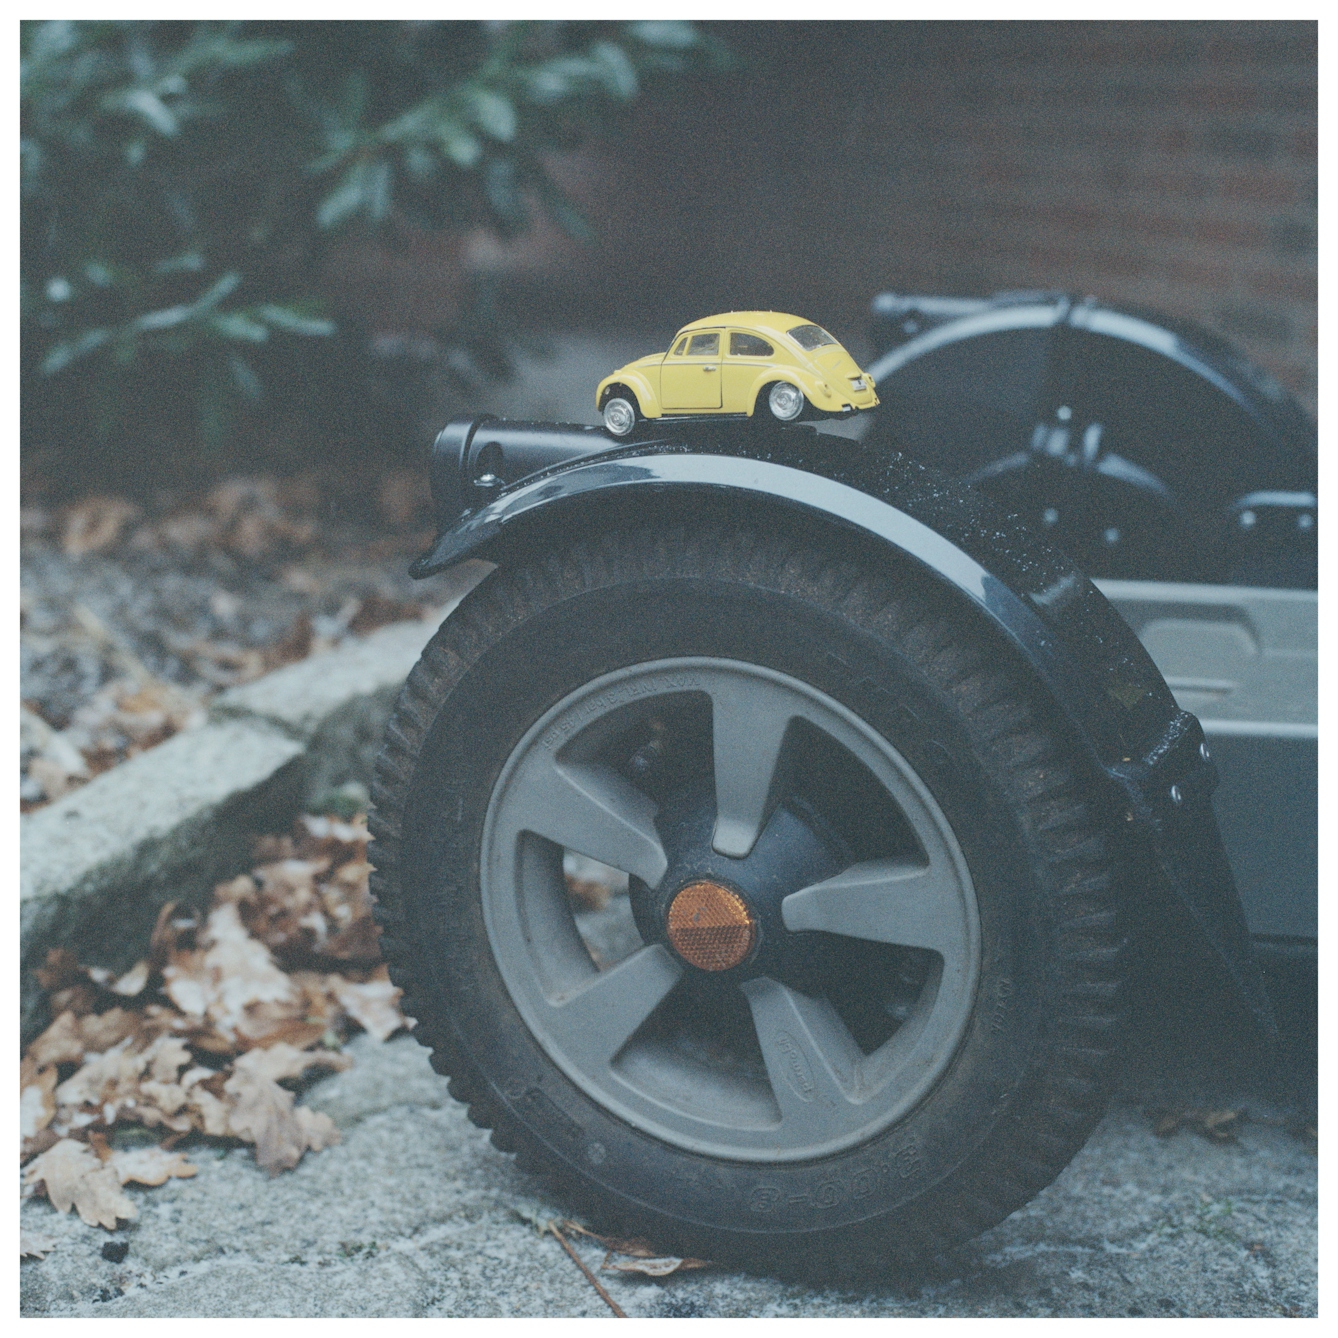 Photograph of the front left wheel of an off road electric wheelchair. The wheel almost fills the frame with a paved garden scene behind. Resting on top of the wheel's mudguard is a toy yellow VW beetle car. The tyres have been lost leaving just the bare silver hubs.